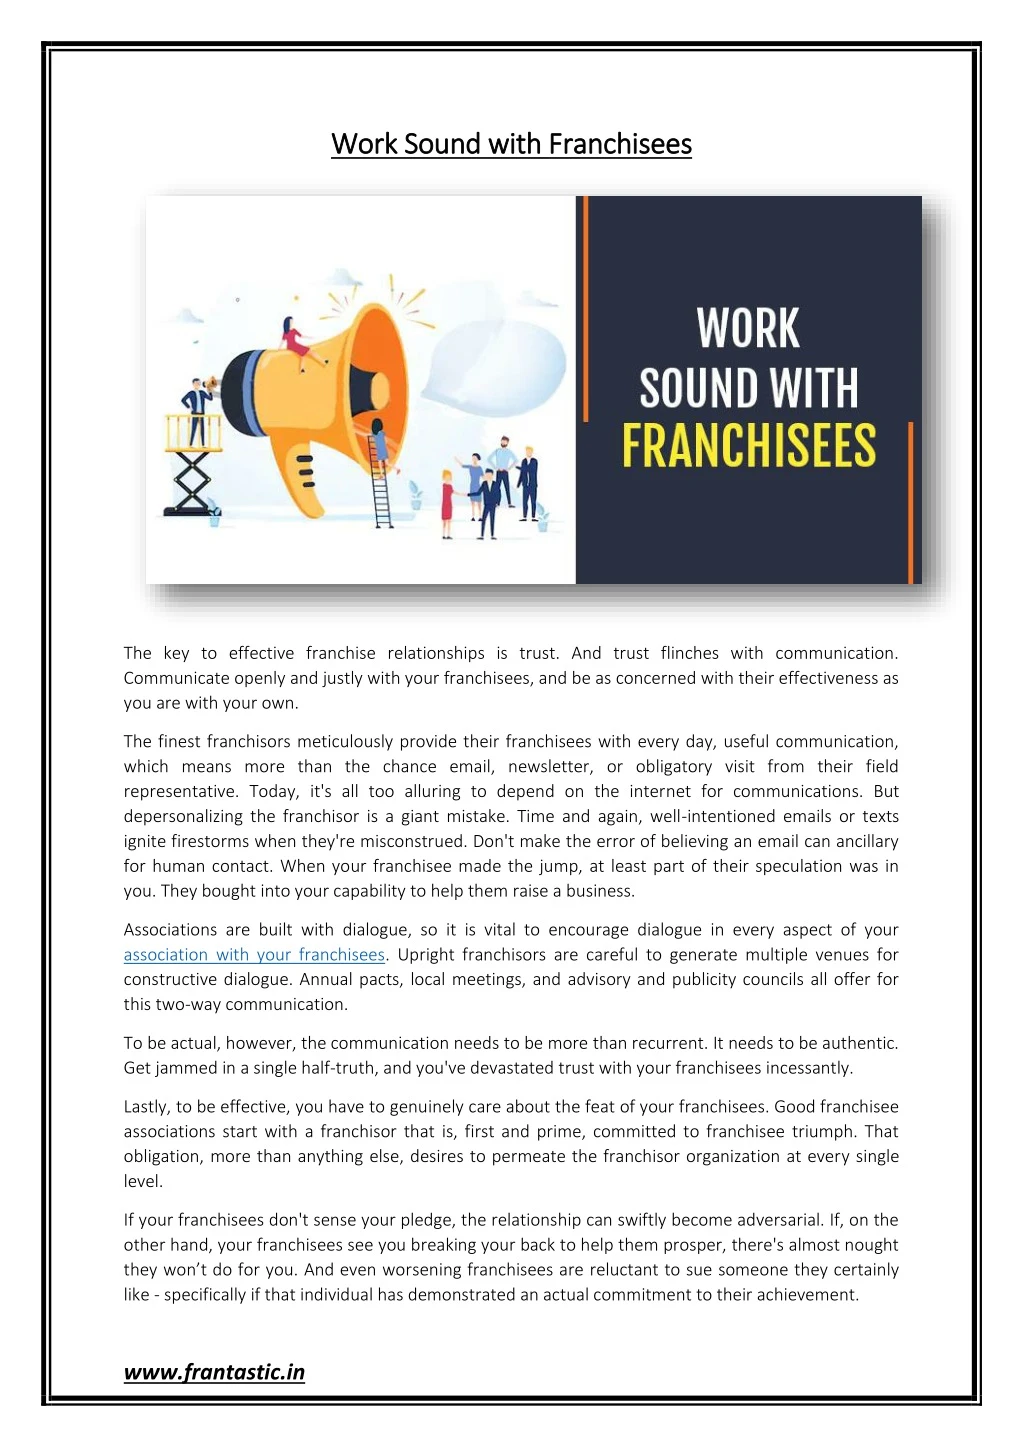 work work sound sound with franchisees with